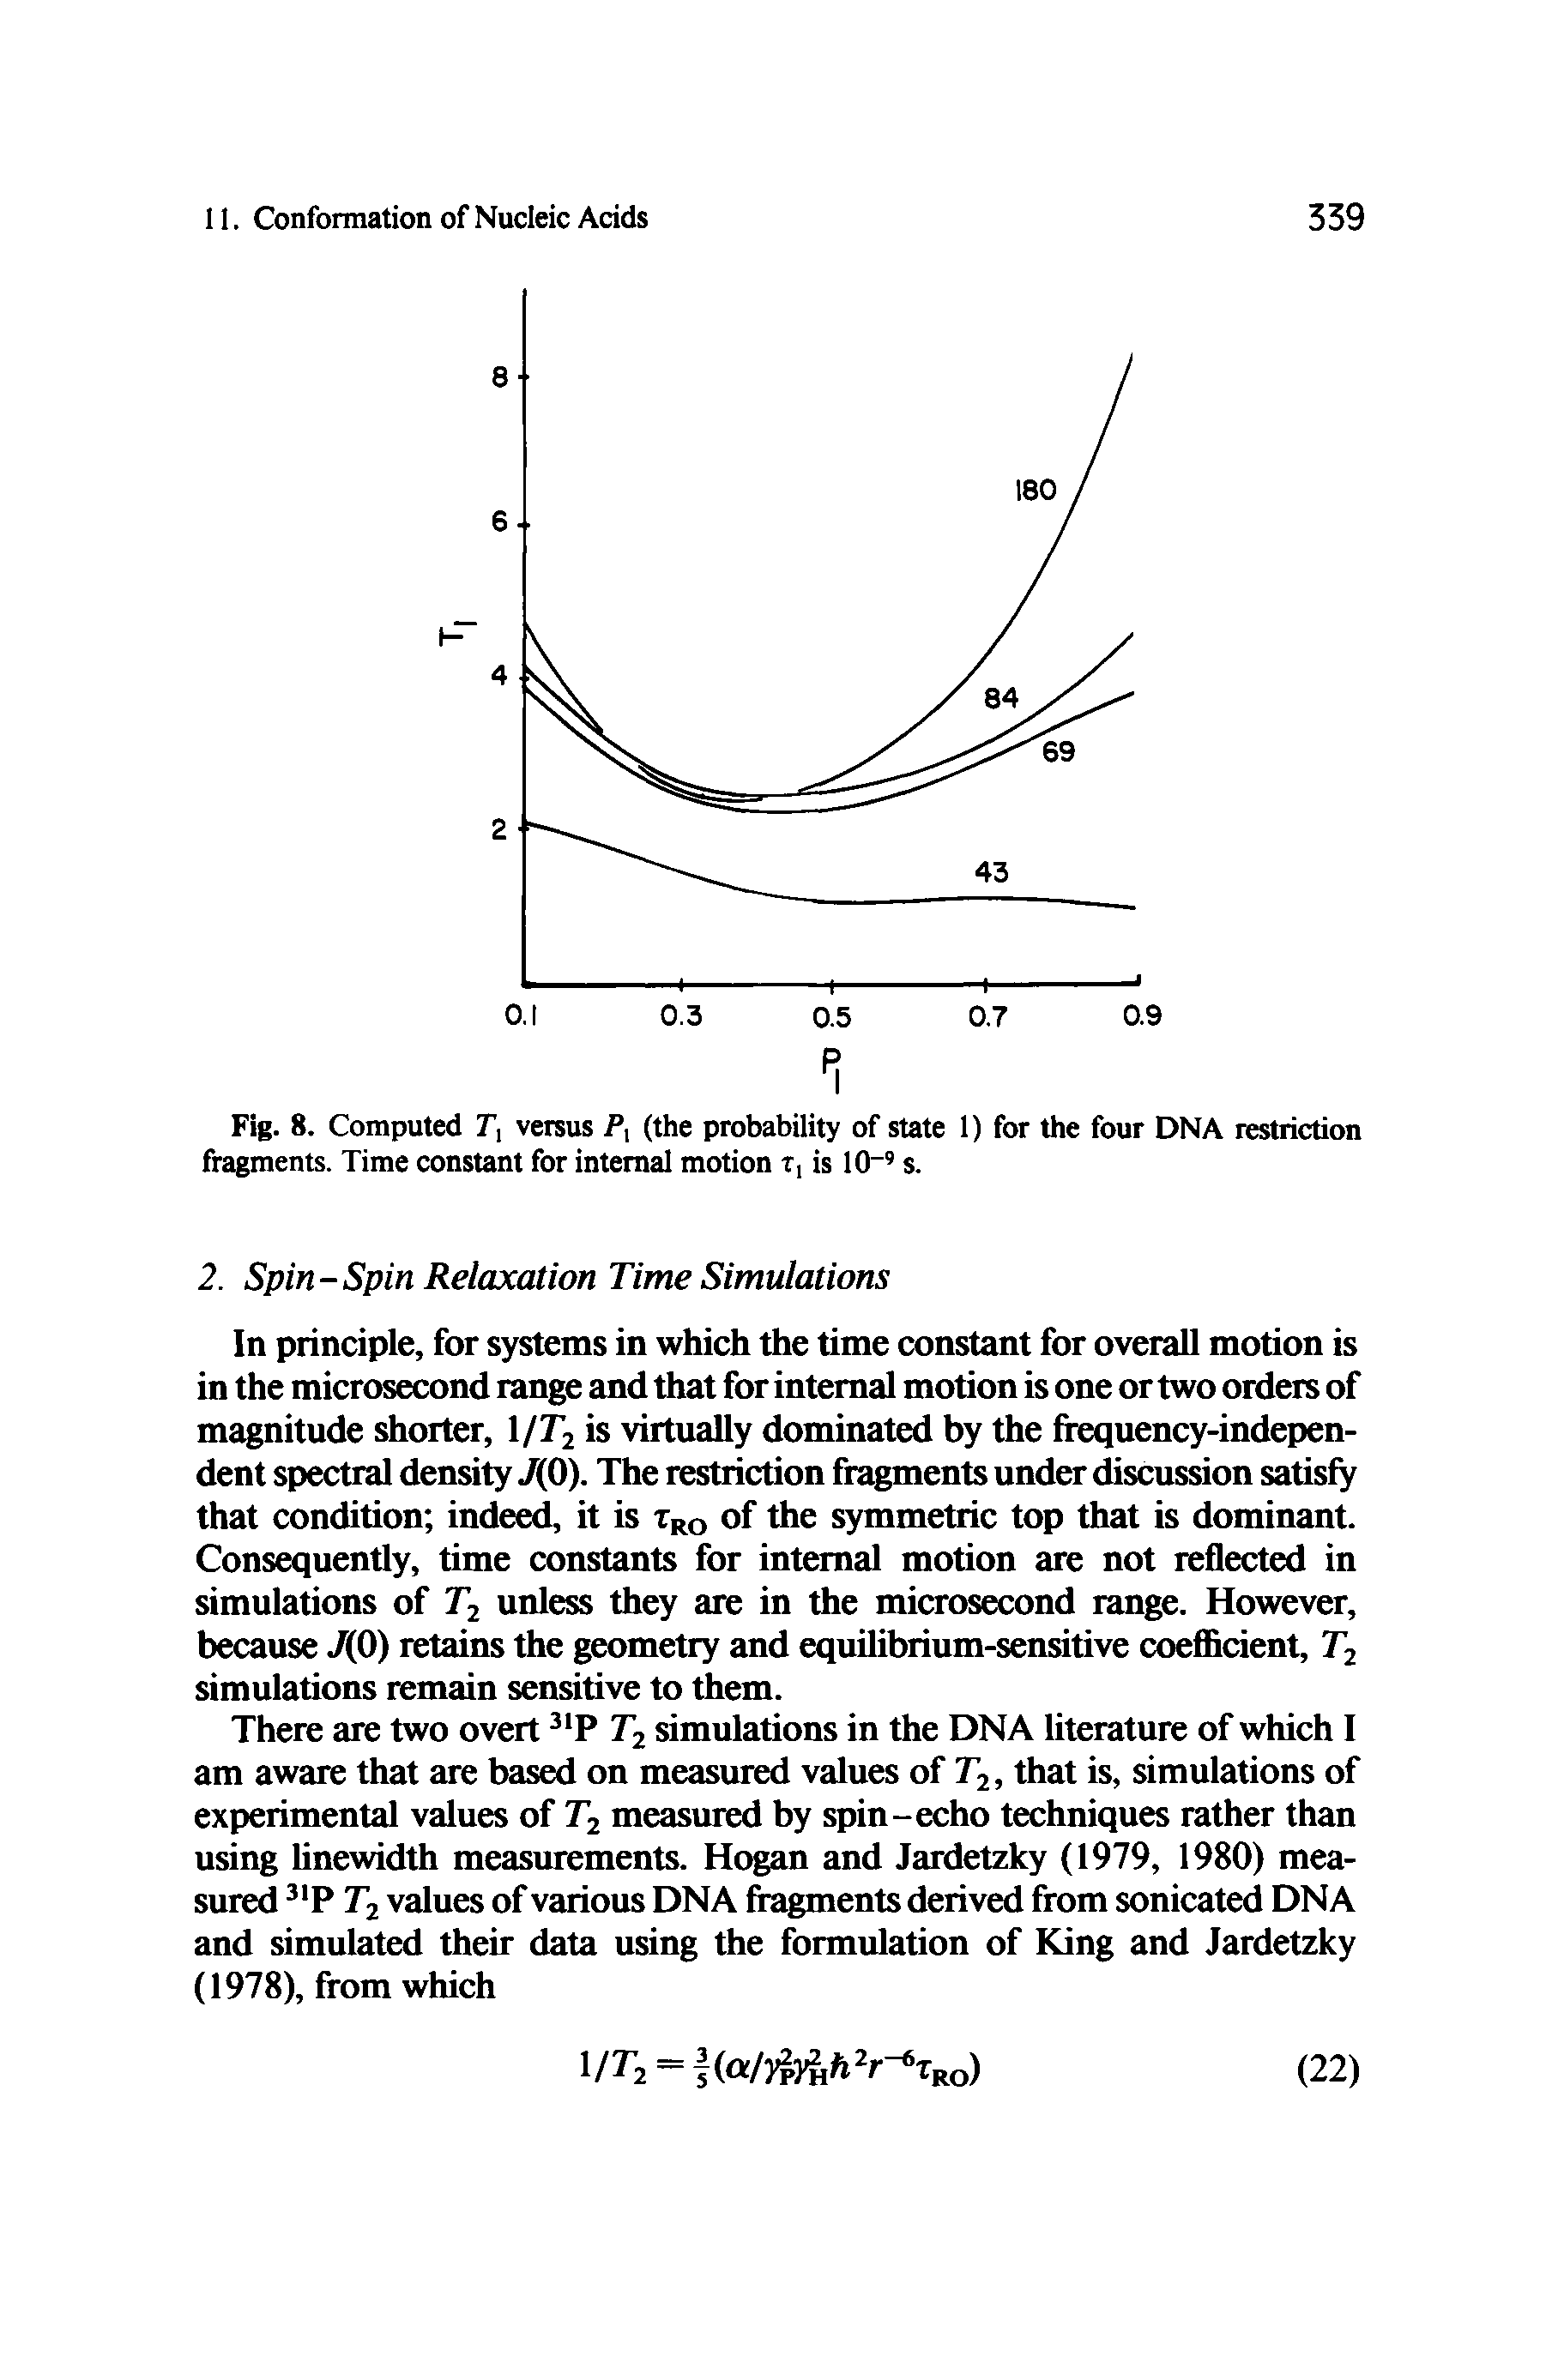 Fig. 8. Computed T, versus P, (the probability of state 1) for the four DNA restriction fragments. Time constant for internal motion r, is 10 s.